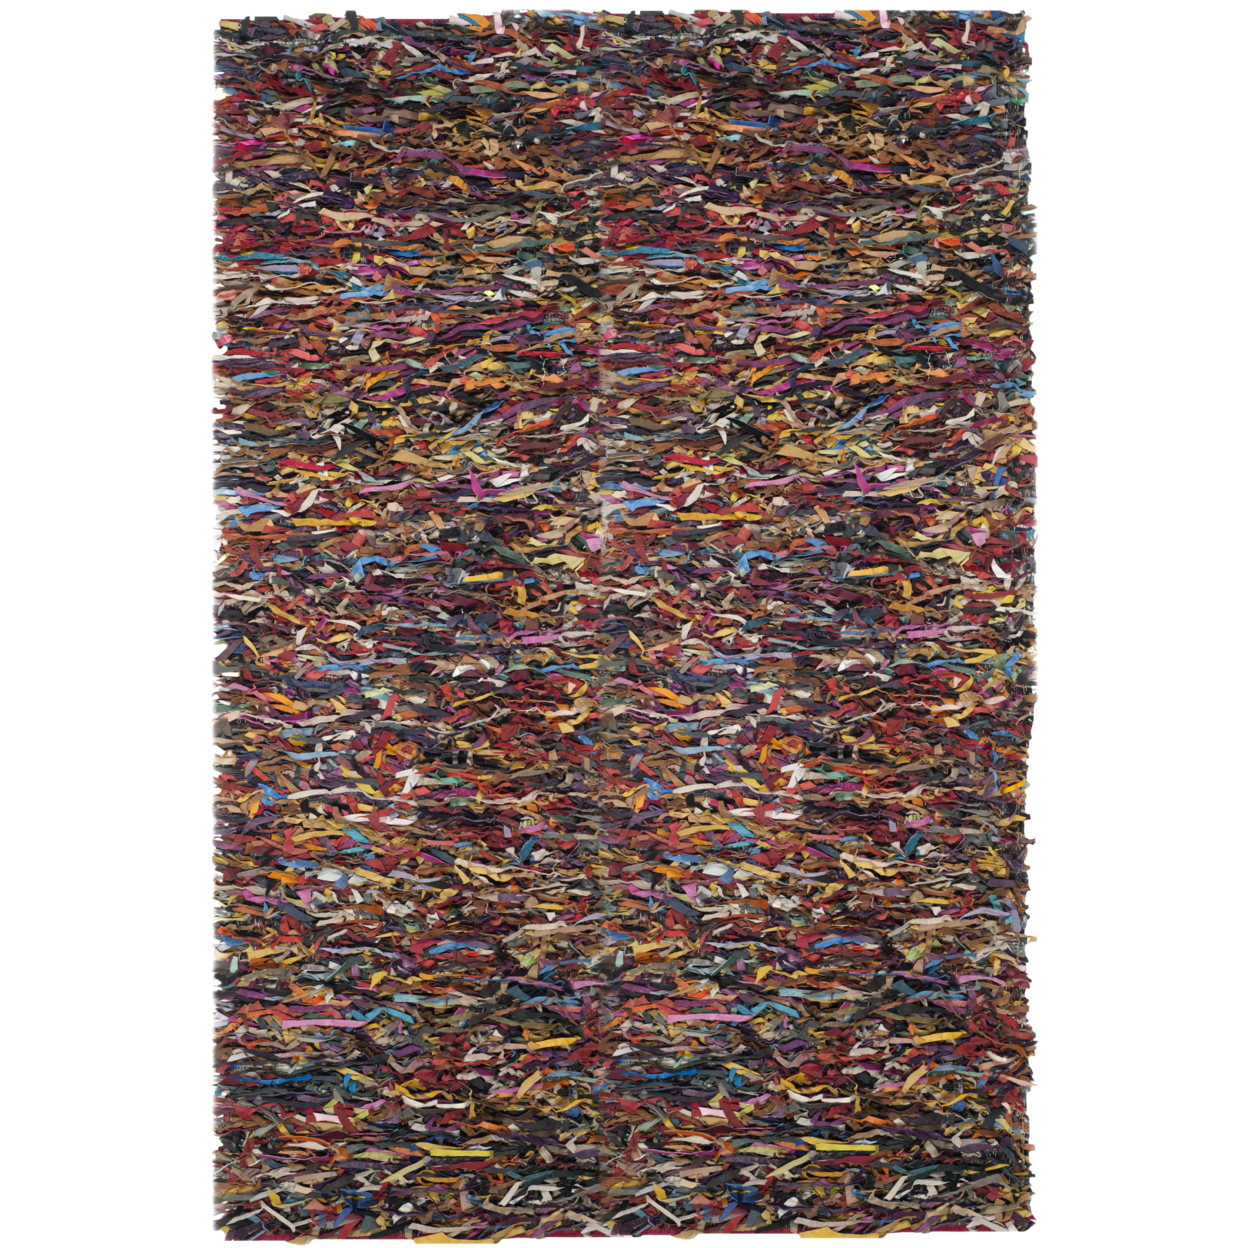 SAFAVIEH Leather Shag LSG511M Hand-knotted Multi Rug - 8' X 10'